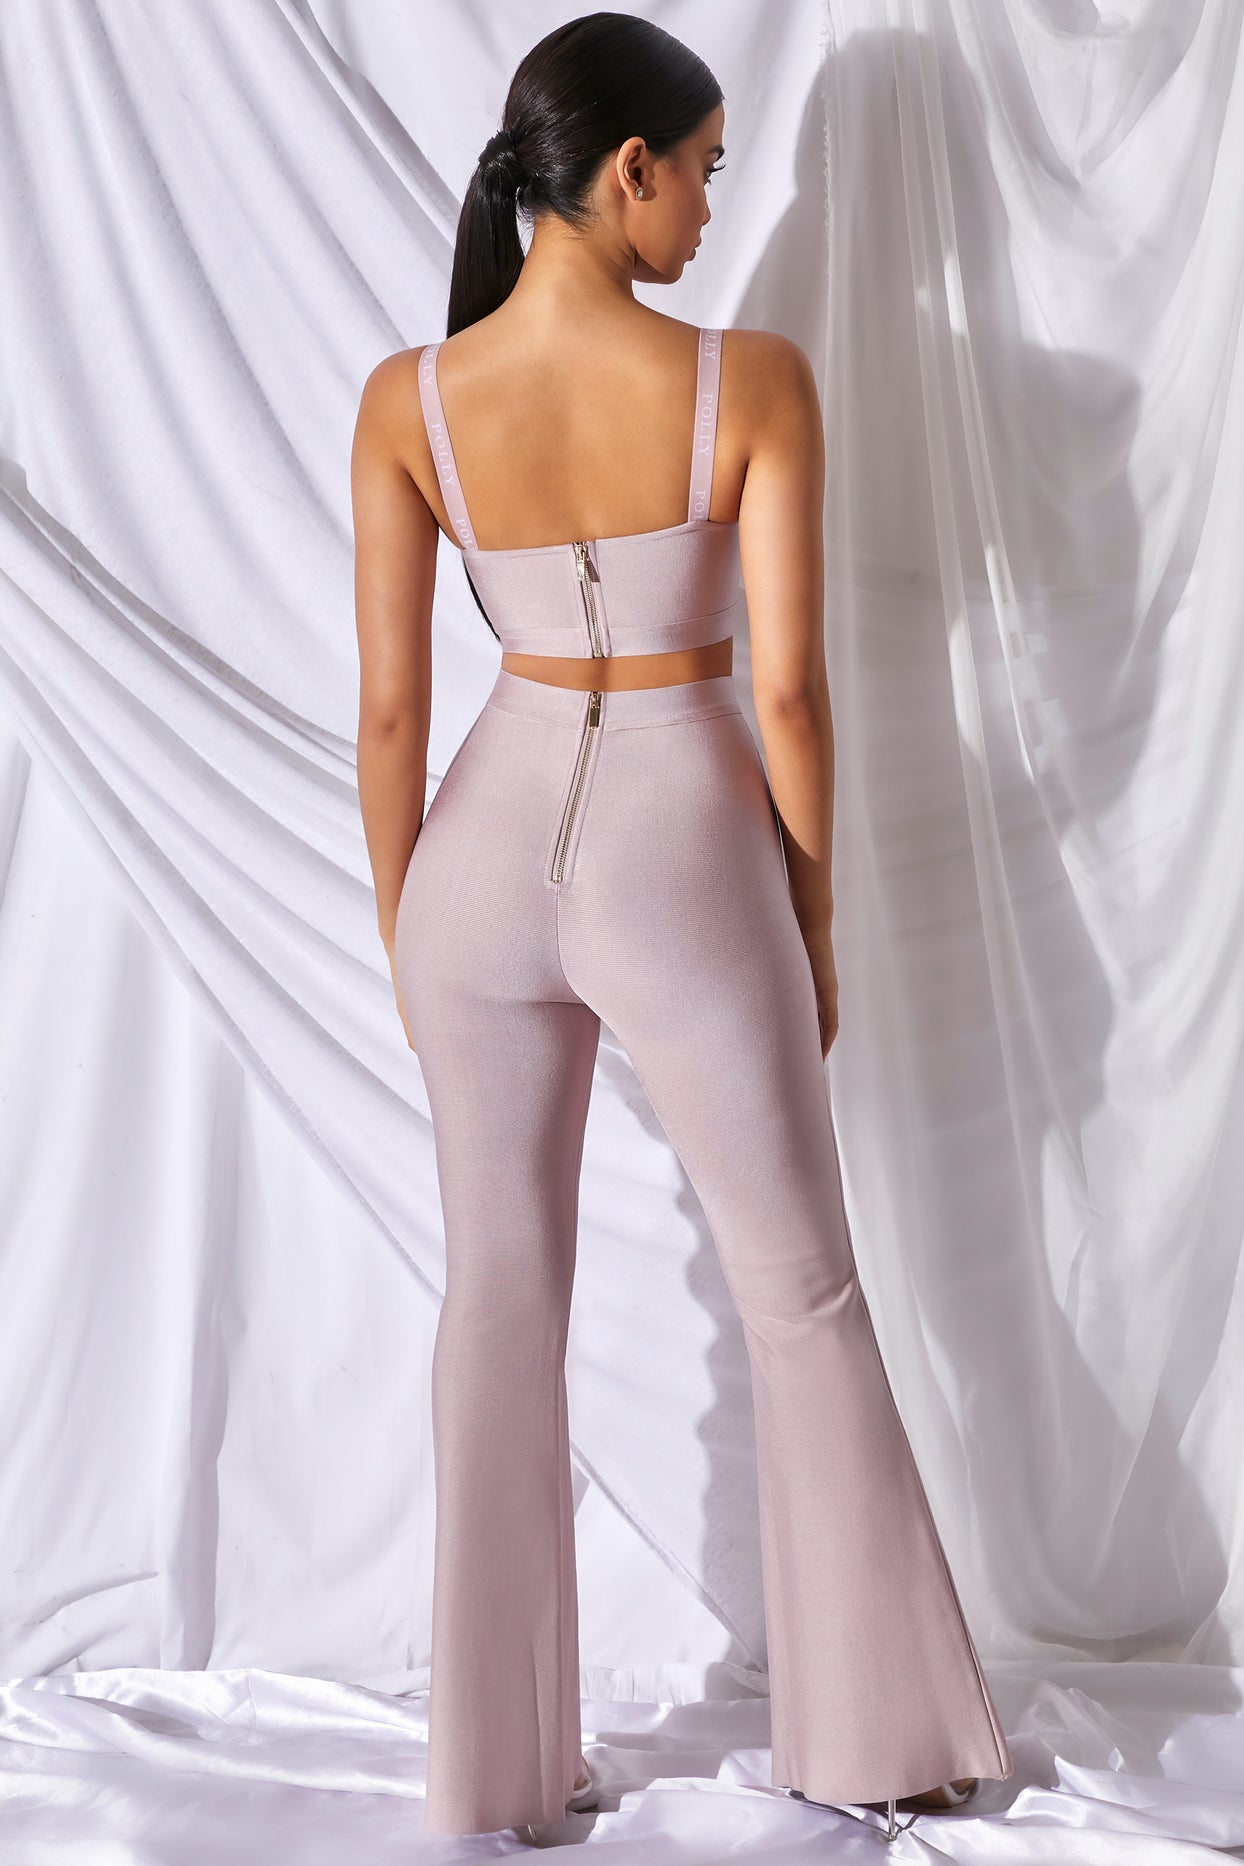 Too Good For You Underwired Bandage Crop Top in Mauve